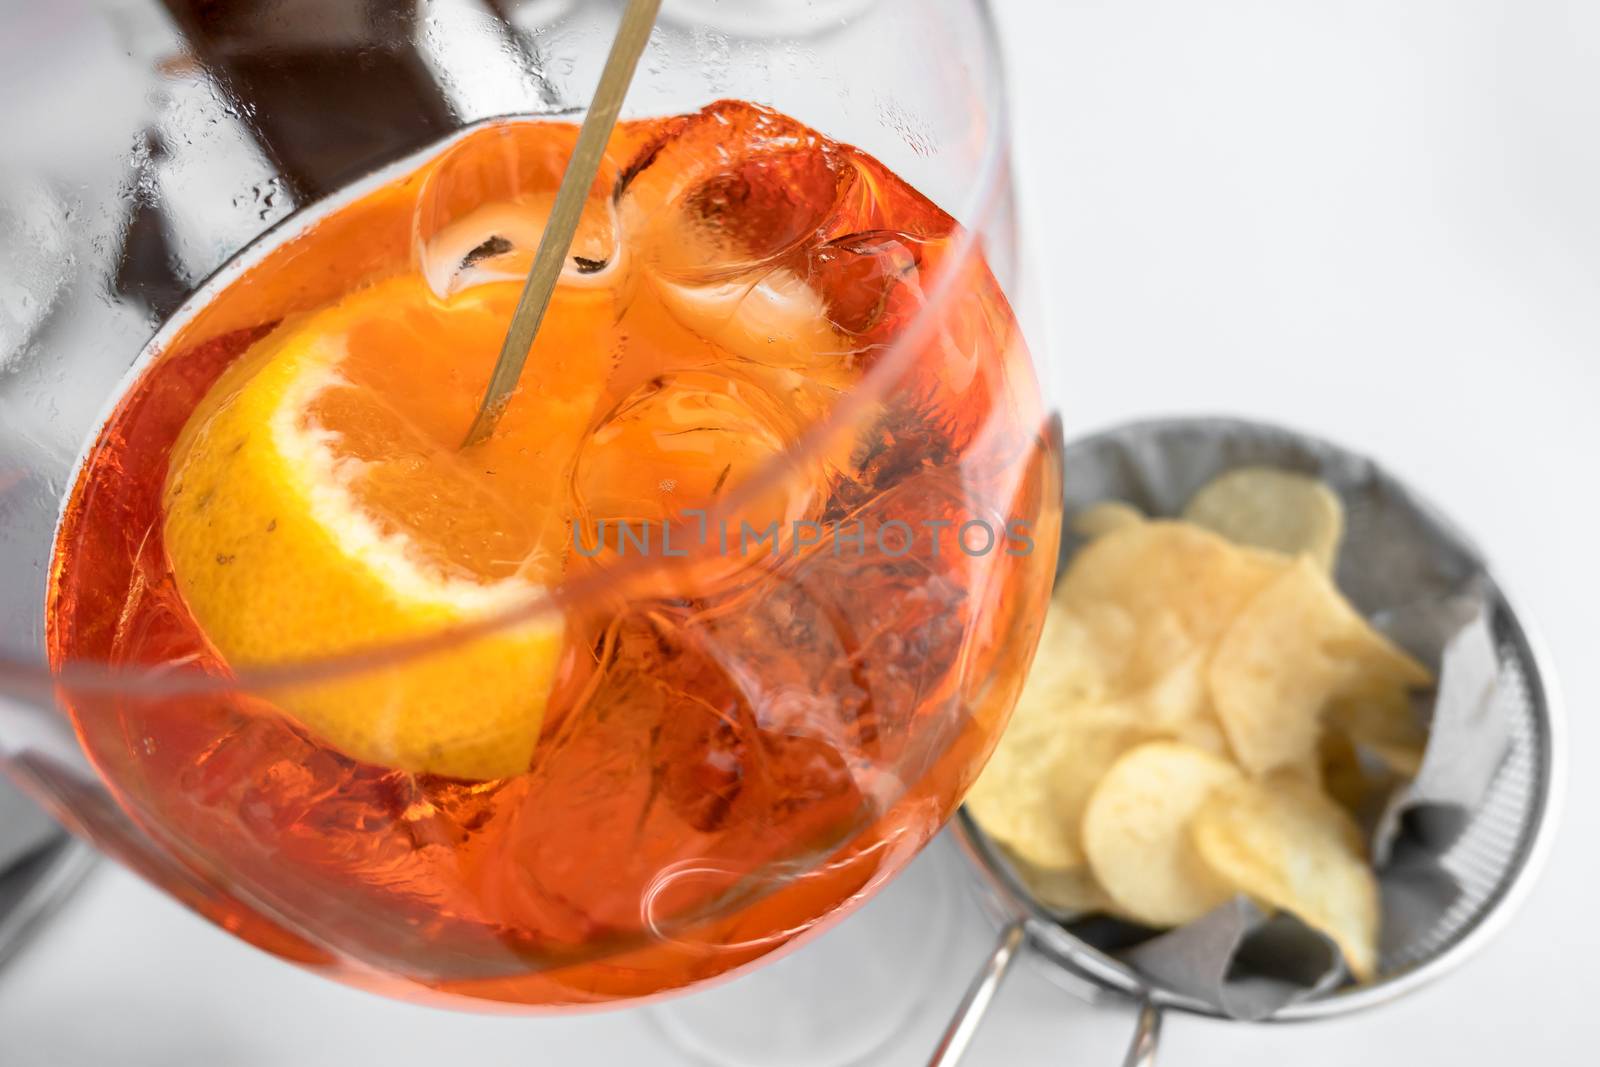 Classic italian spritz cocktail with chips. Copy space.